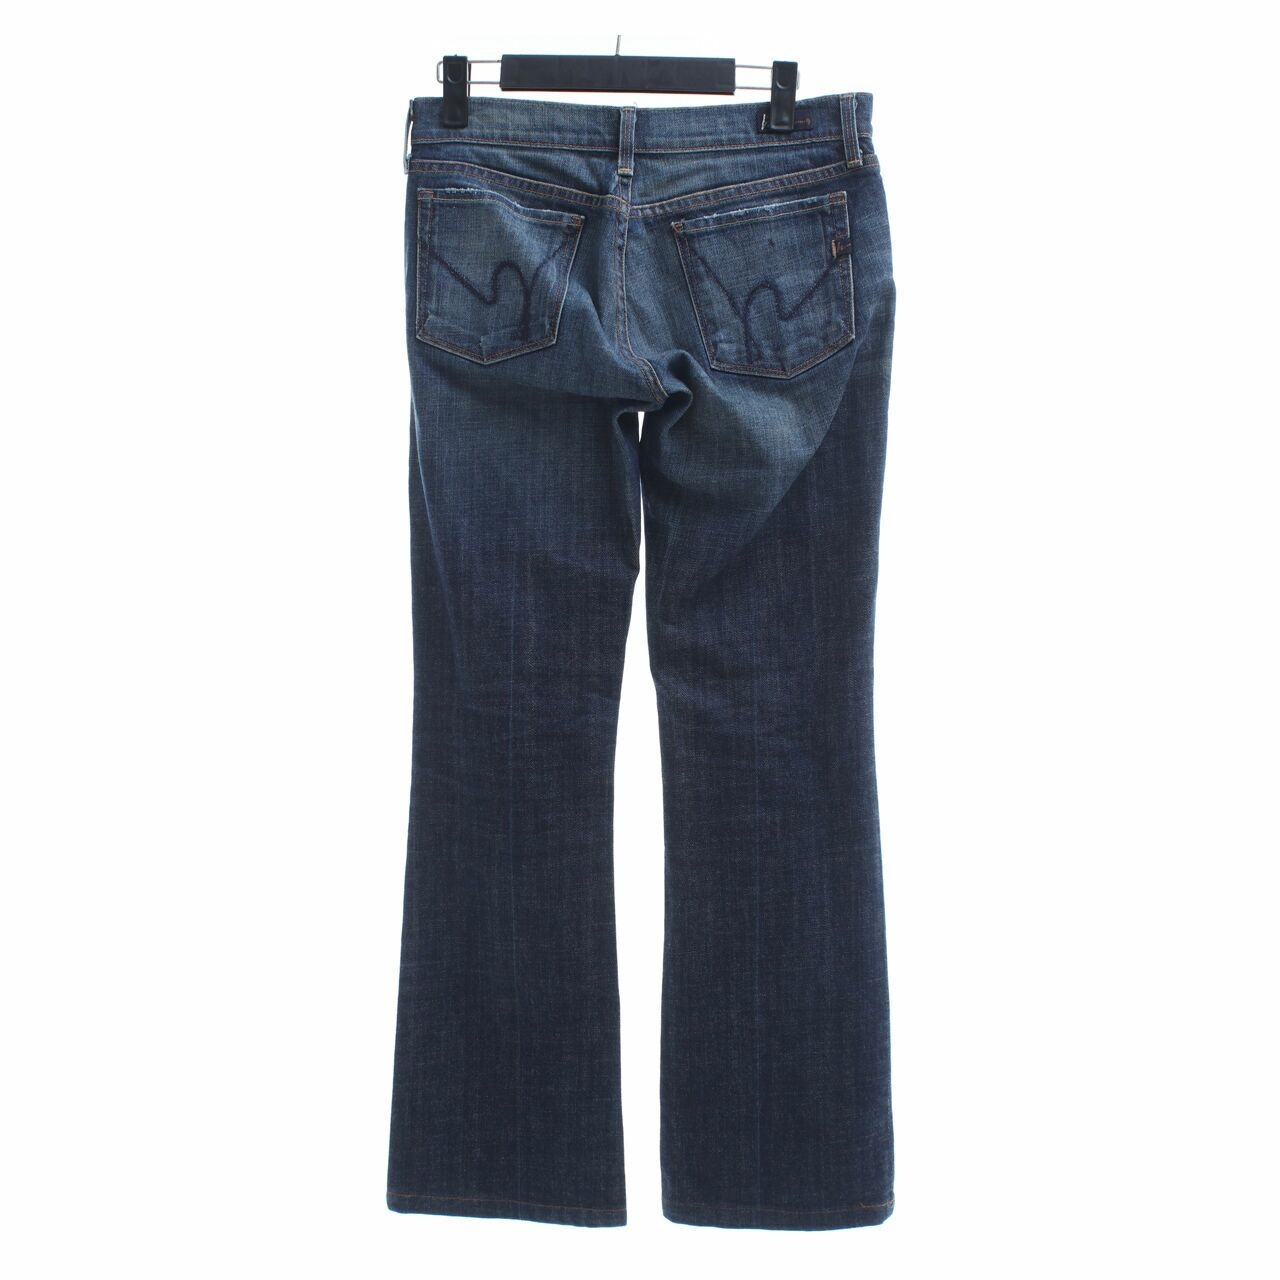 Citizens of Humanity Dark Blue Washed Denim Long Pants